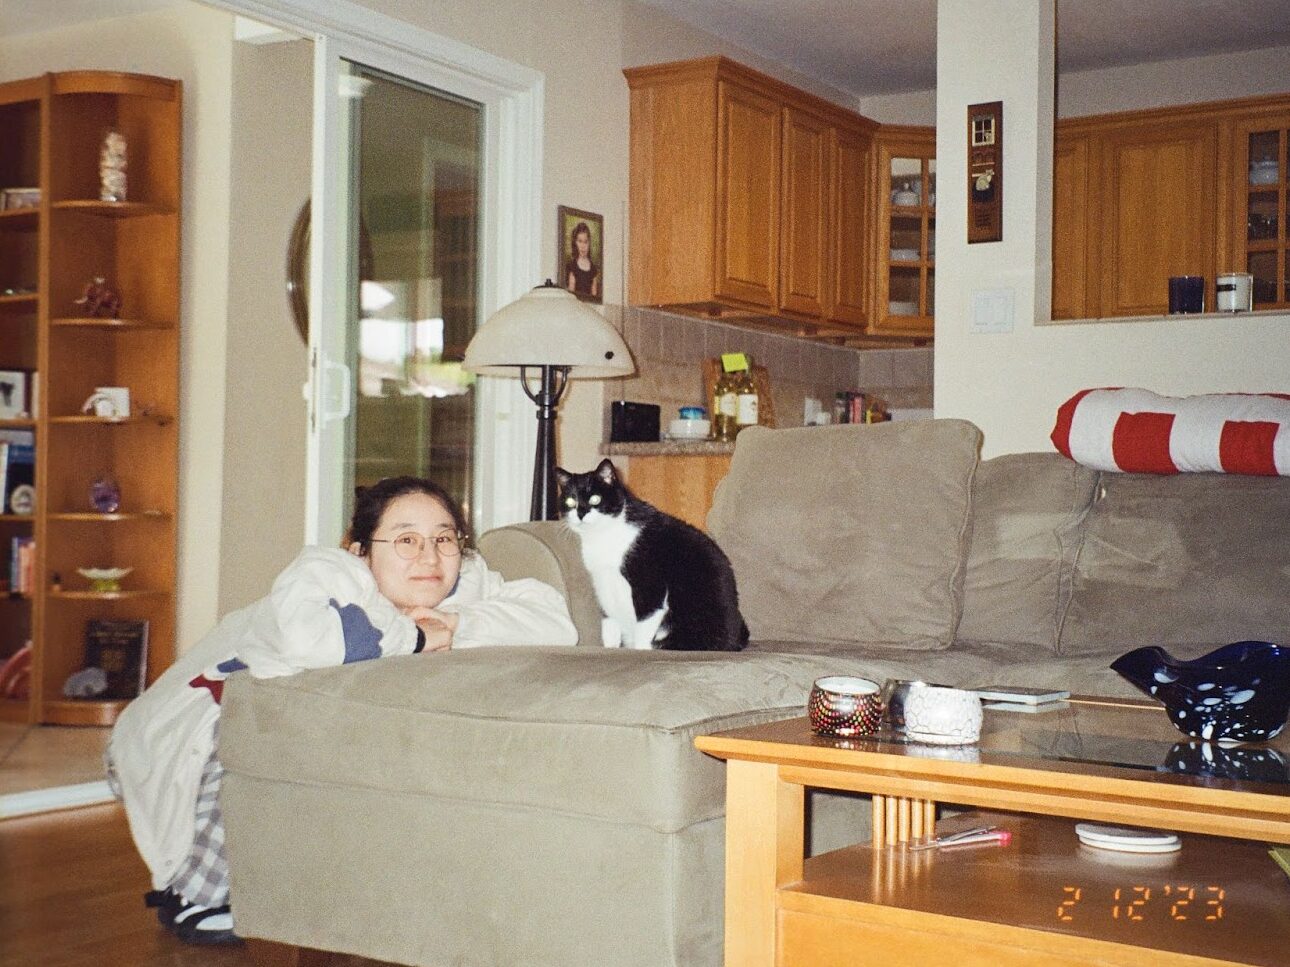 photo of the author of this post next to a black and white cat on a couch